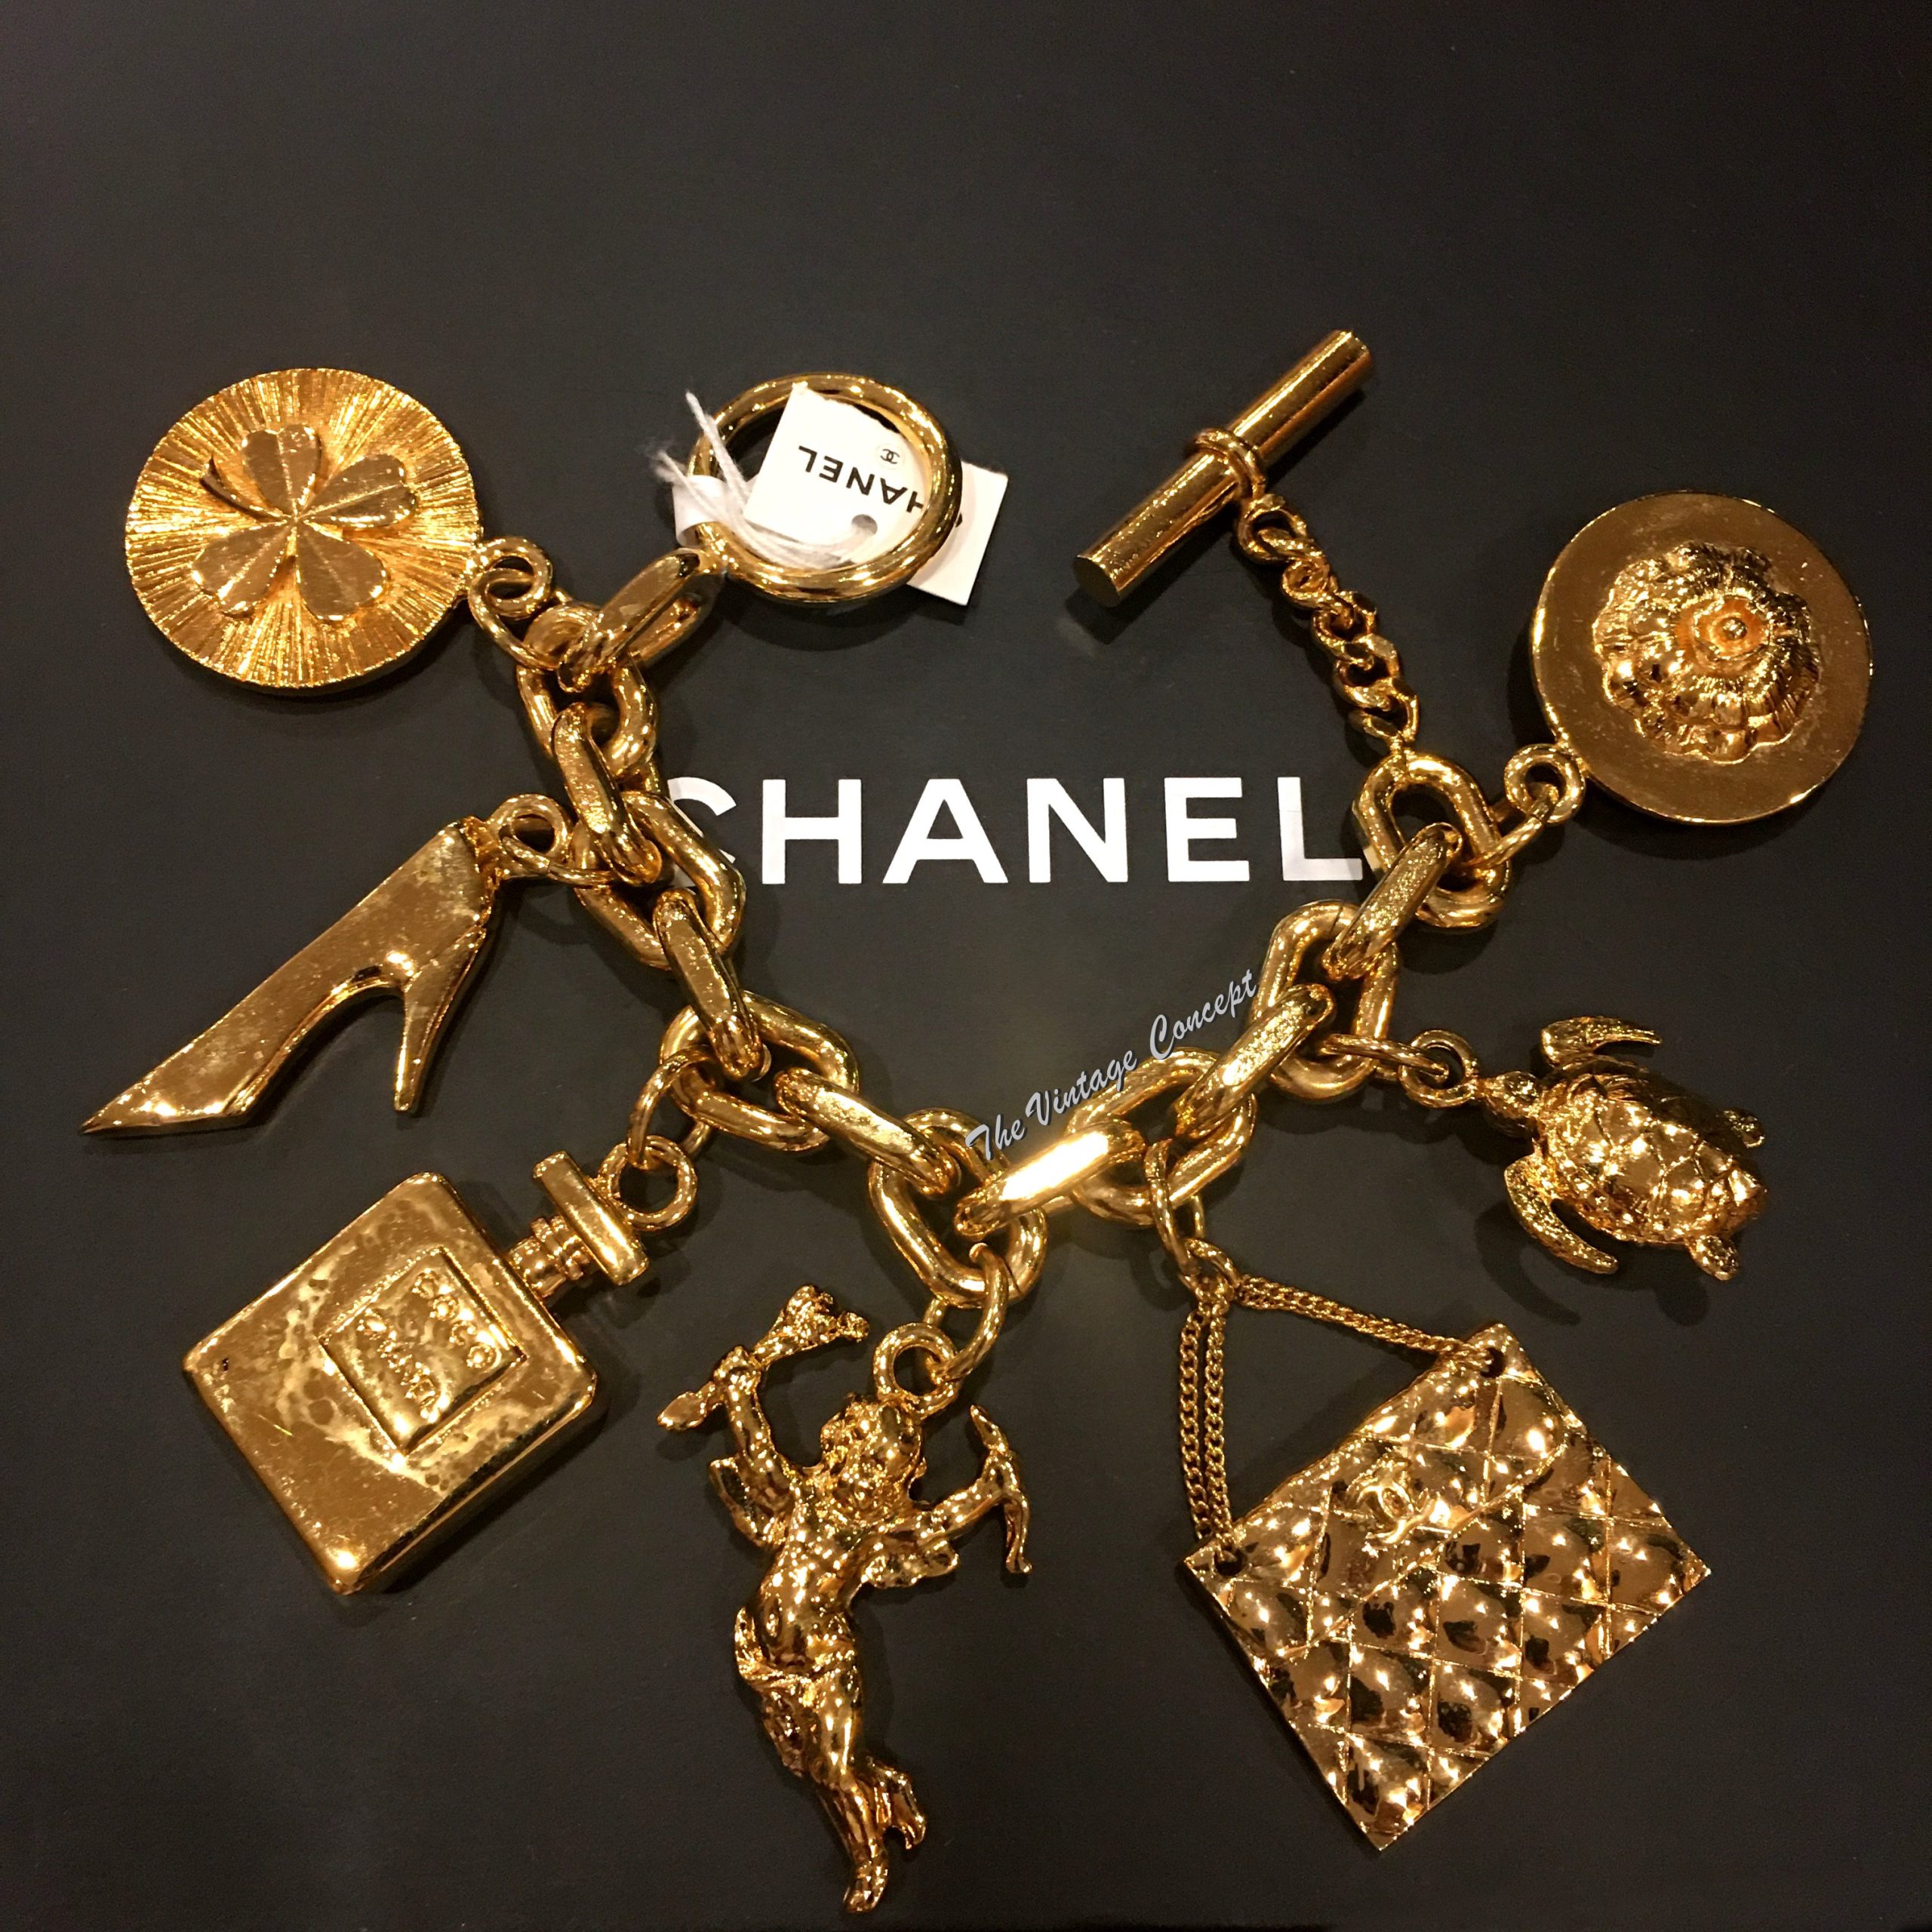 Chanel Gold Tone Heavy Charm Bracelet from 1980's (SOLD) - The